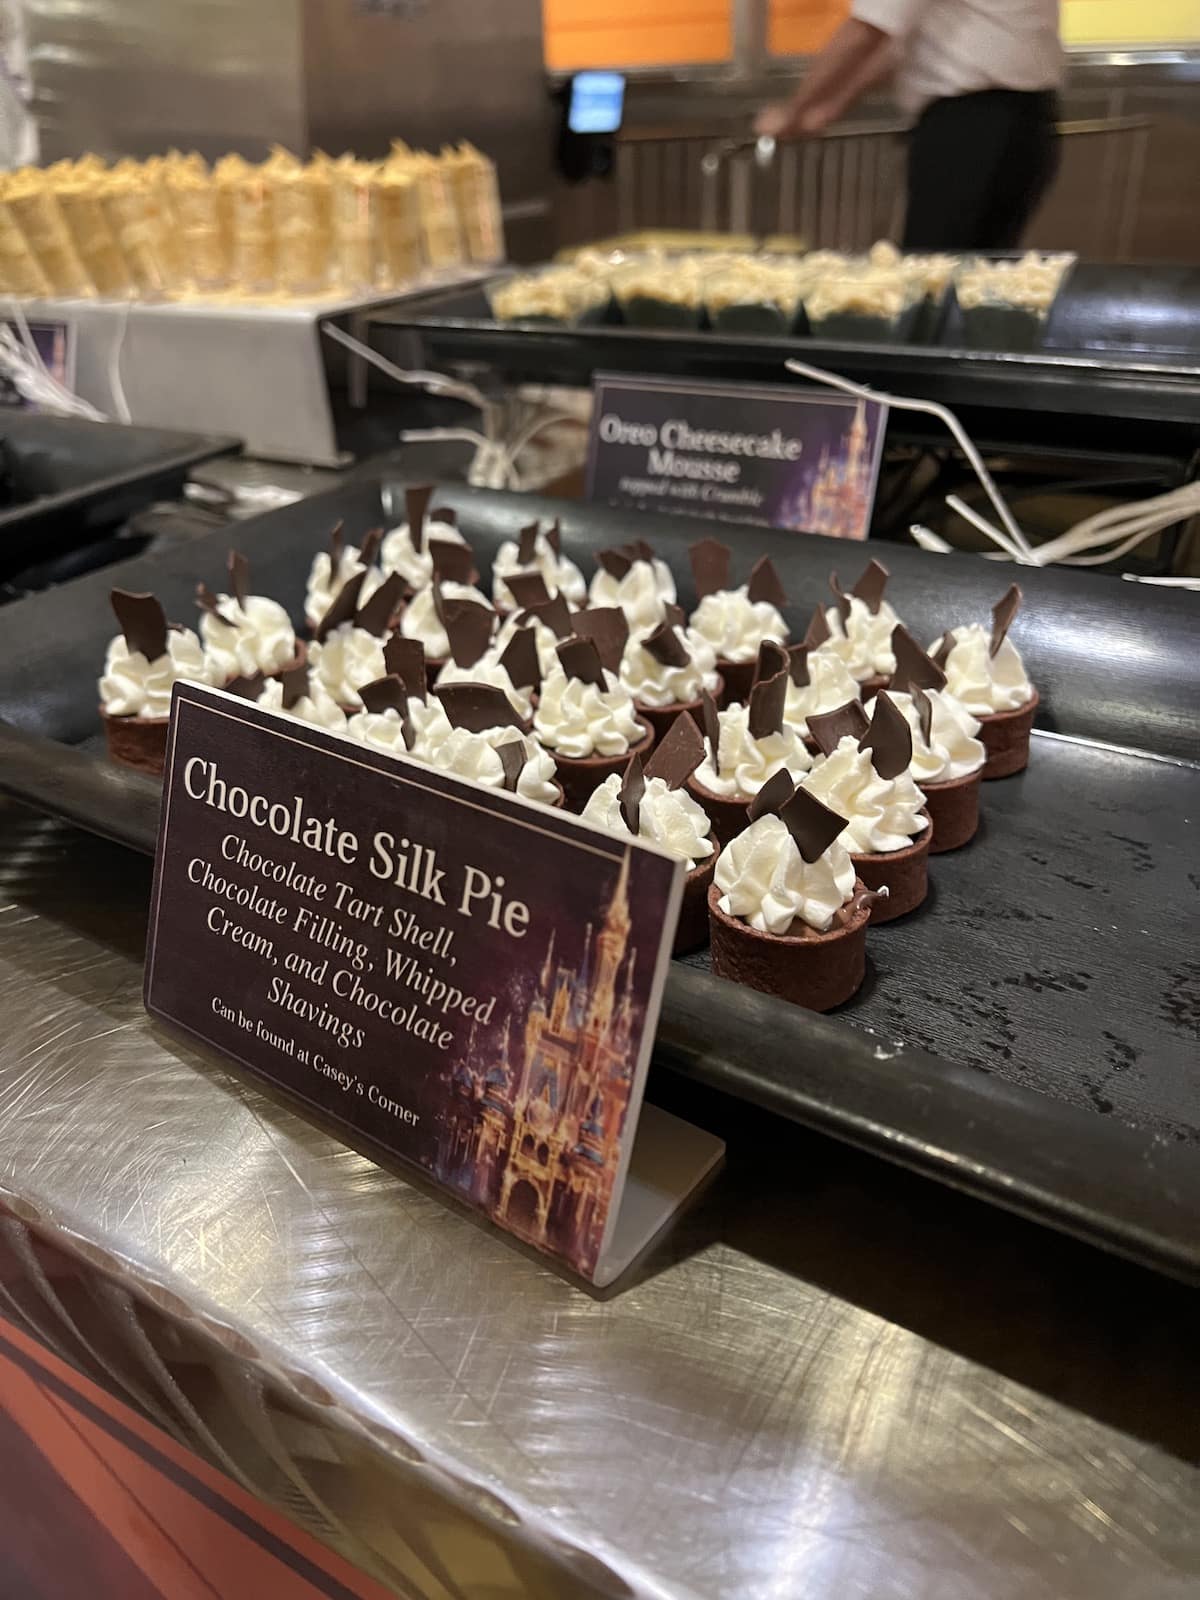 Disney Enchantment Treats and Seats - Disney Fireworks Dessert Party Review and the Answer to the Question: "what time does the fireworks start at disney world?"